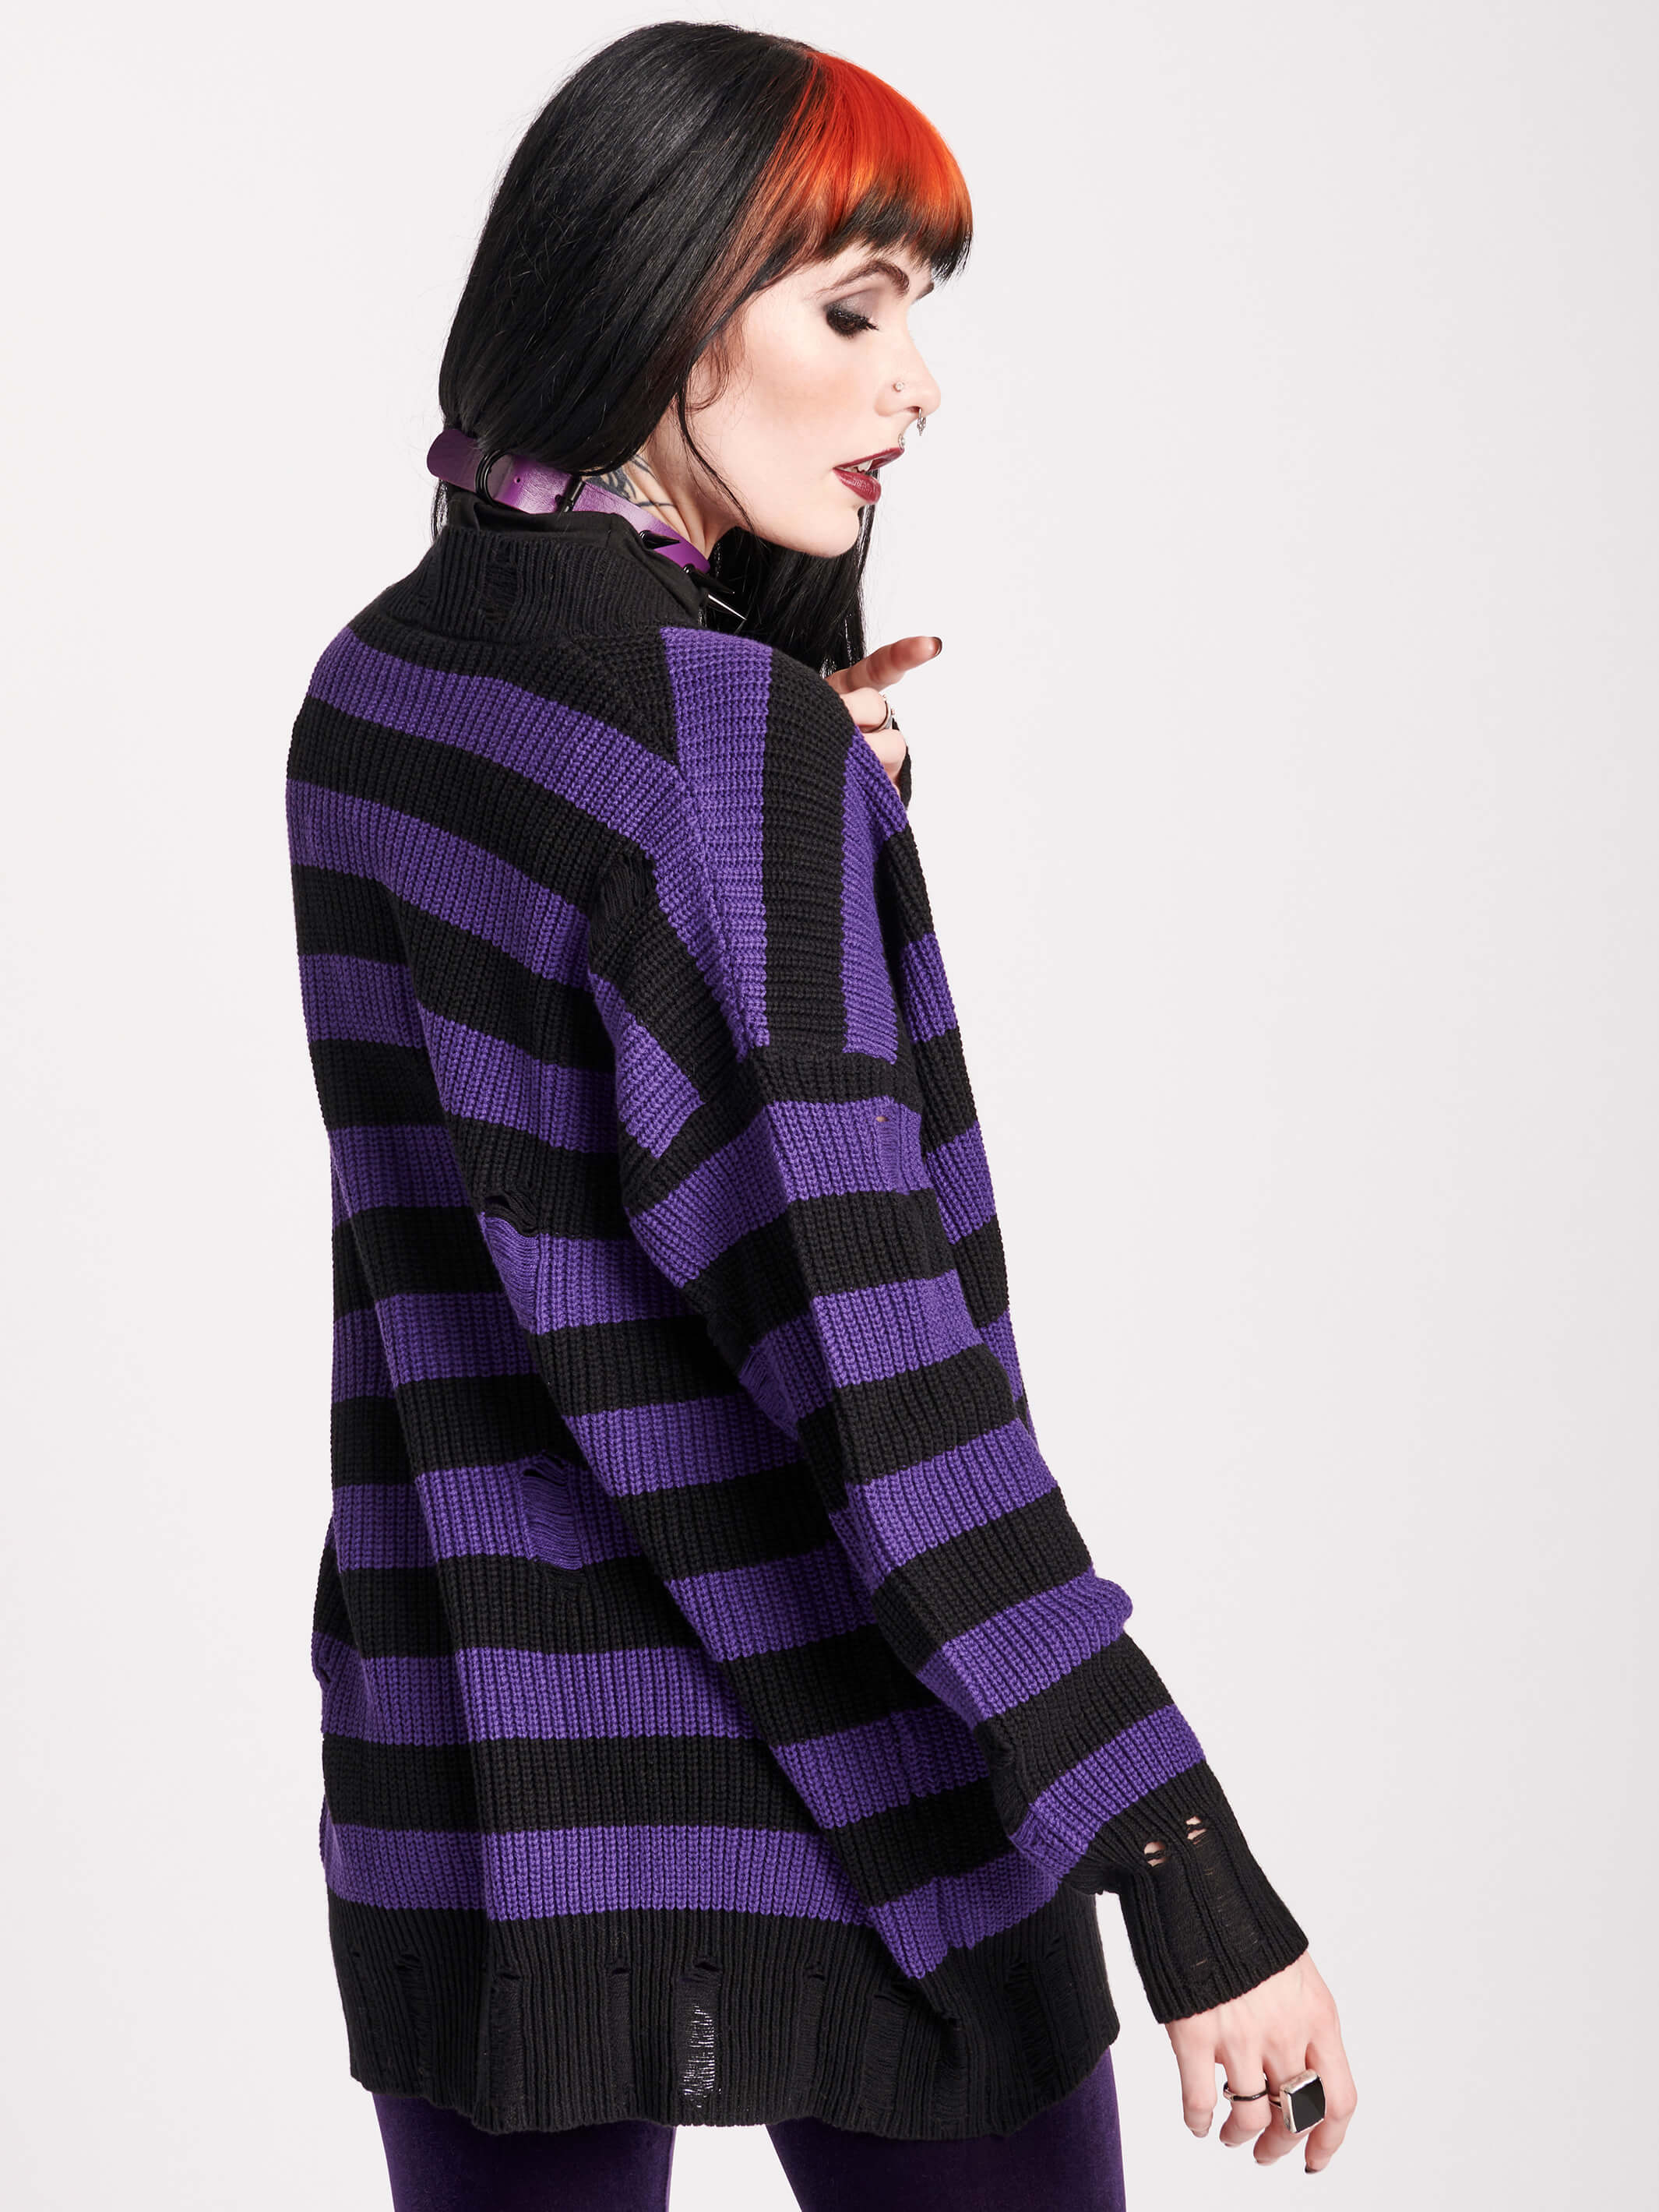 purple and black stiped cardigan with drop stitch details throughout